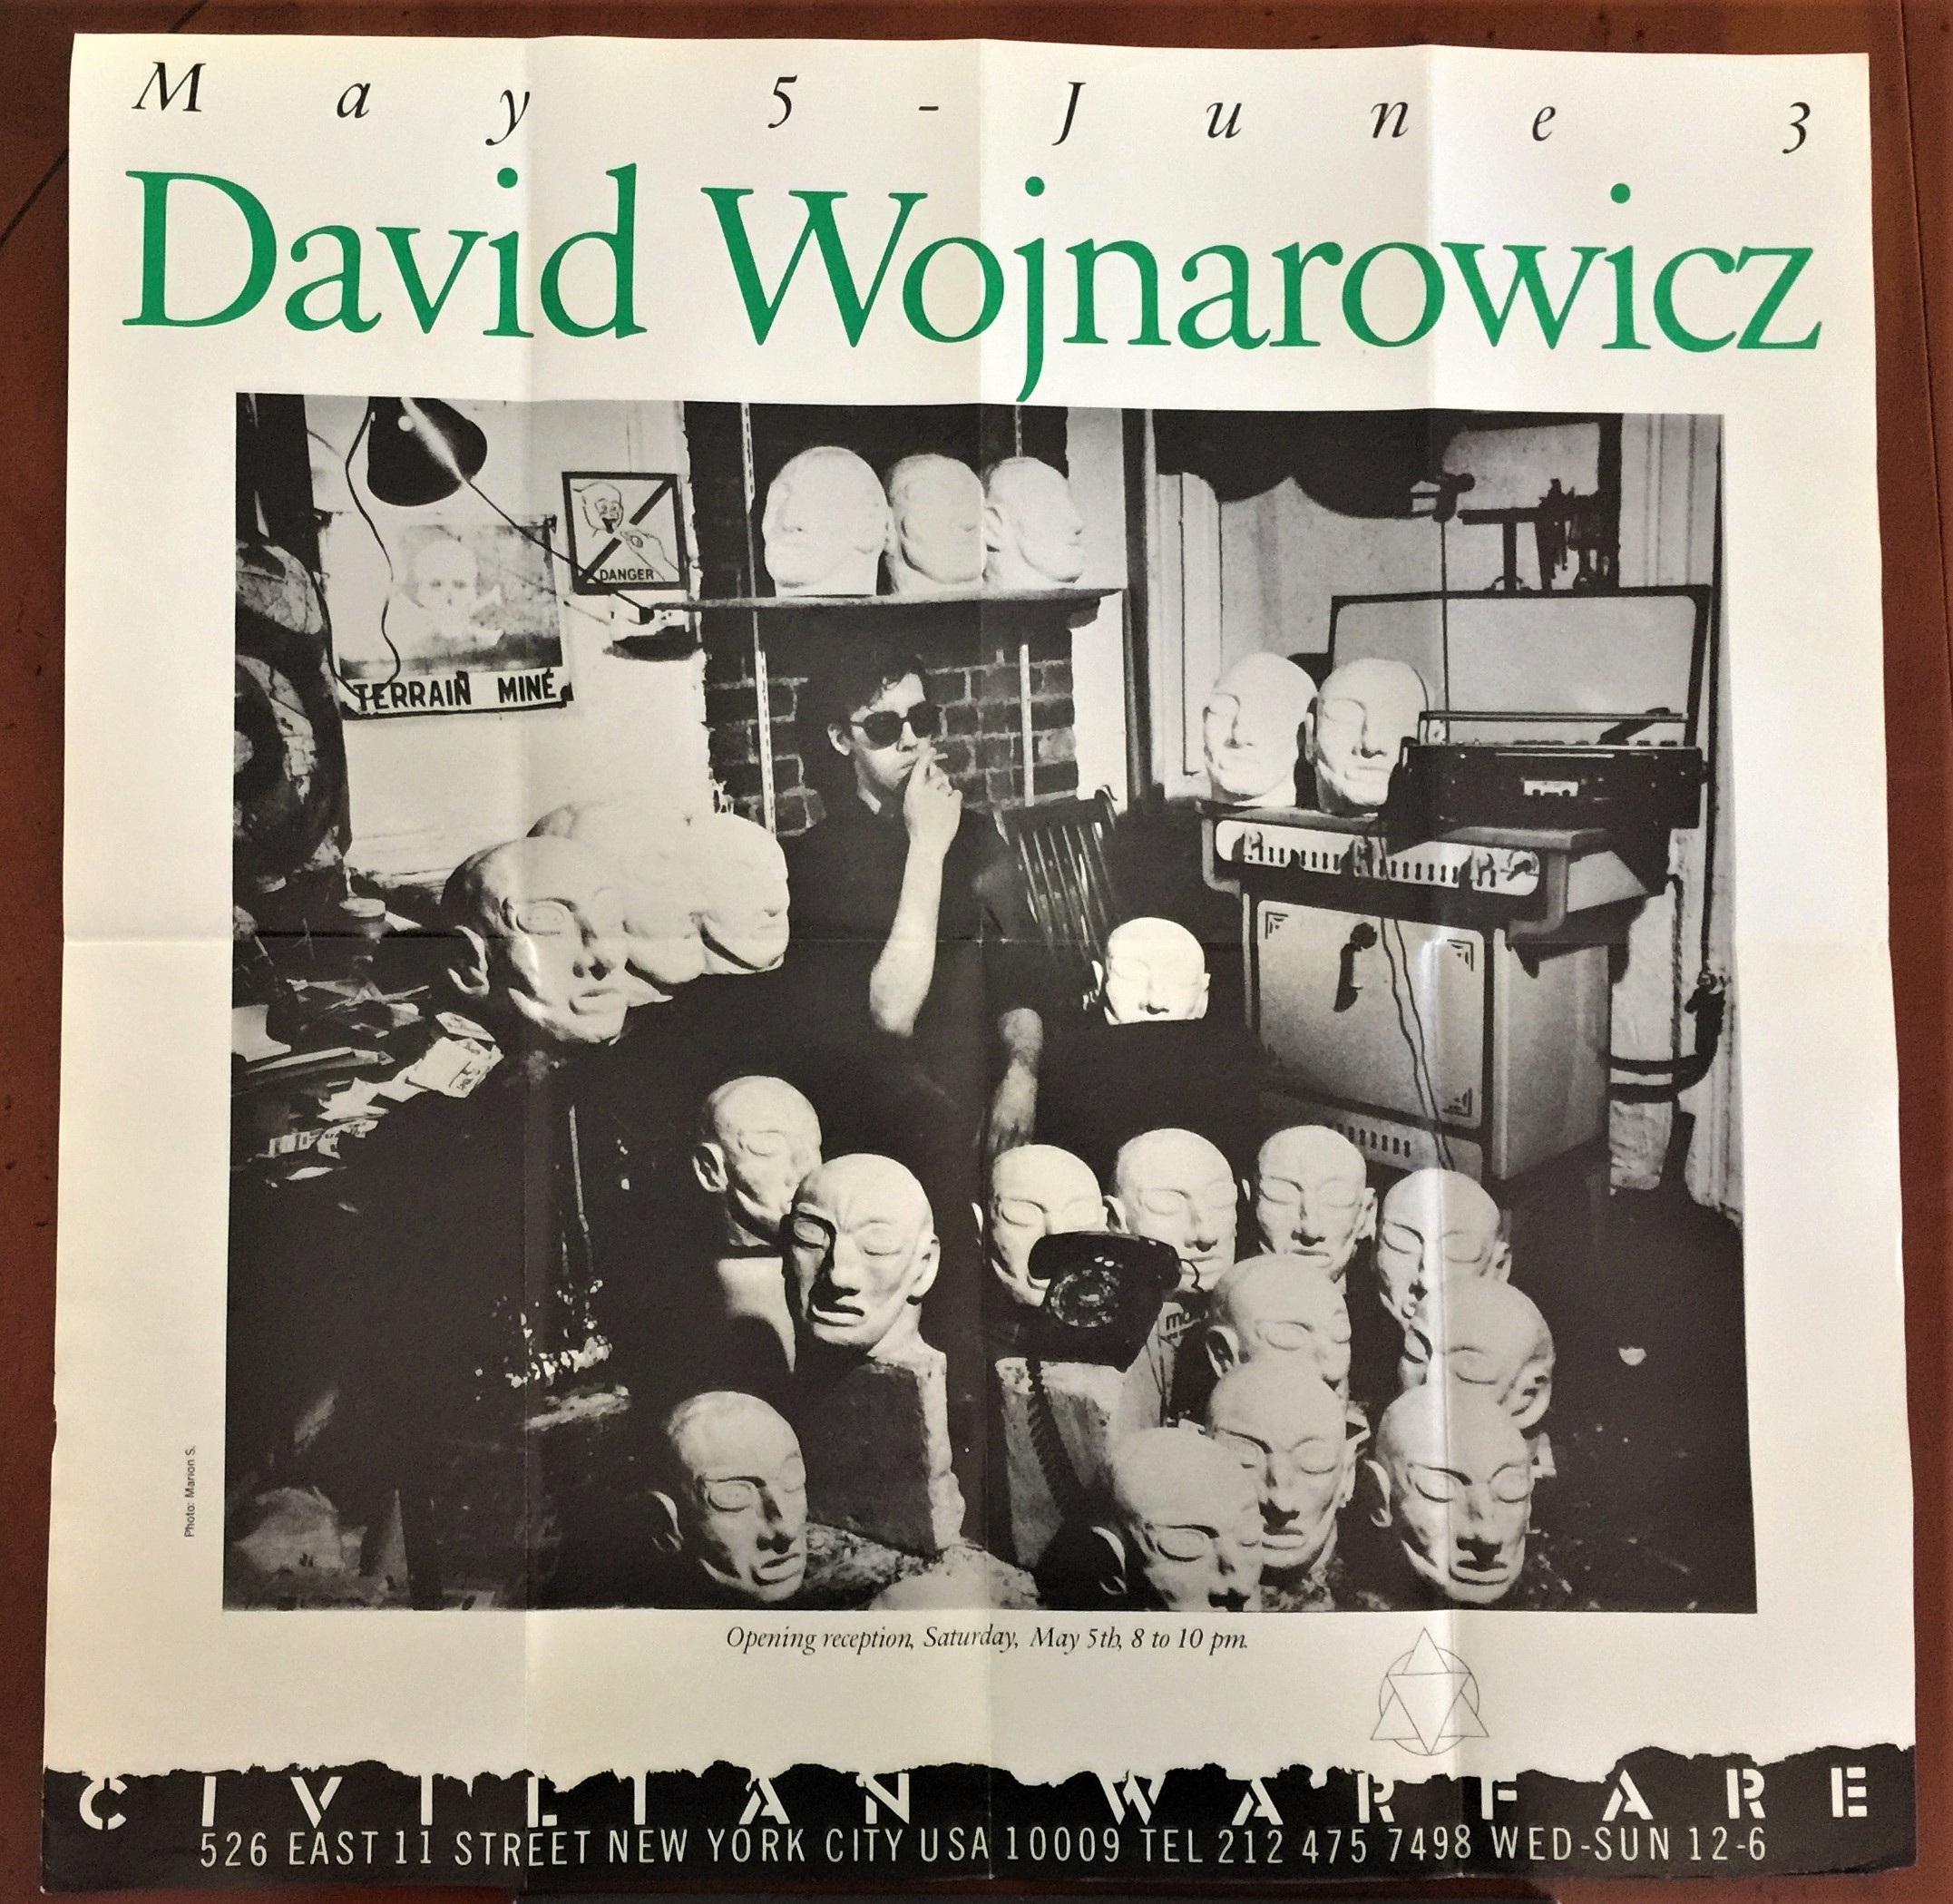 Civilian Warfare poster for David Wojnarowicz solo show May 5 - June 3, 1984. Photo of David surrounded by his Metamorphosis series in his Bowery studio by Marion Scemama.